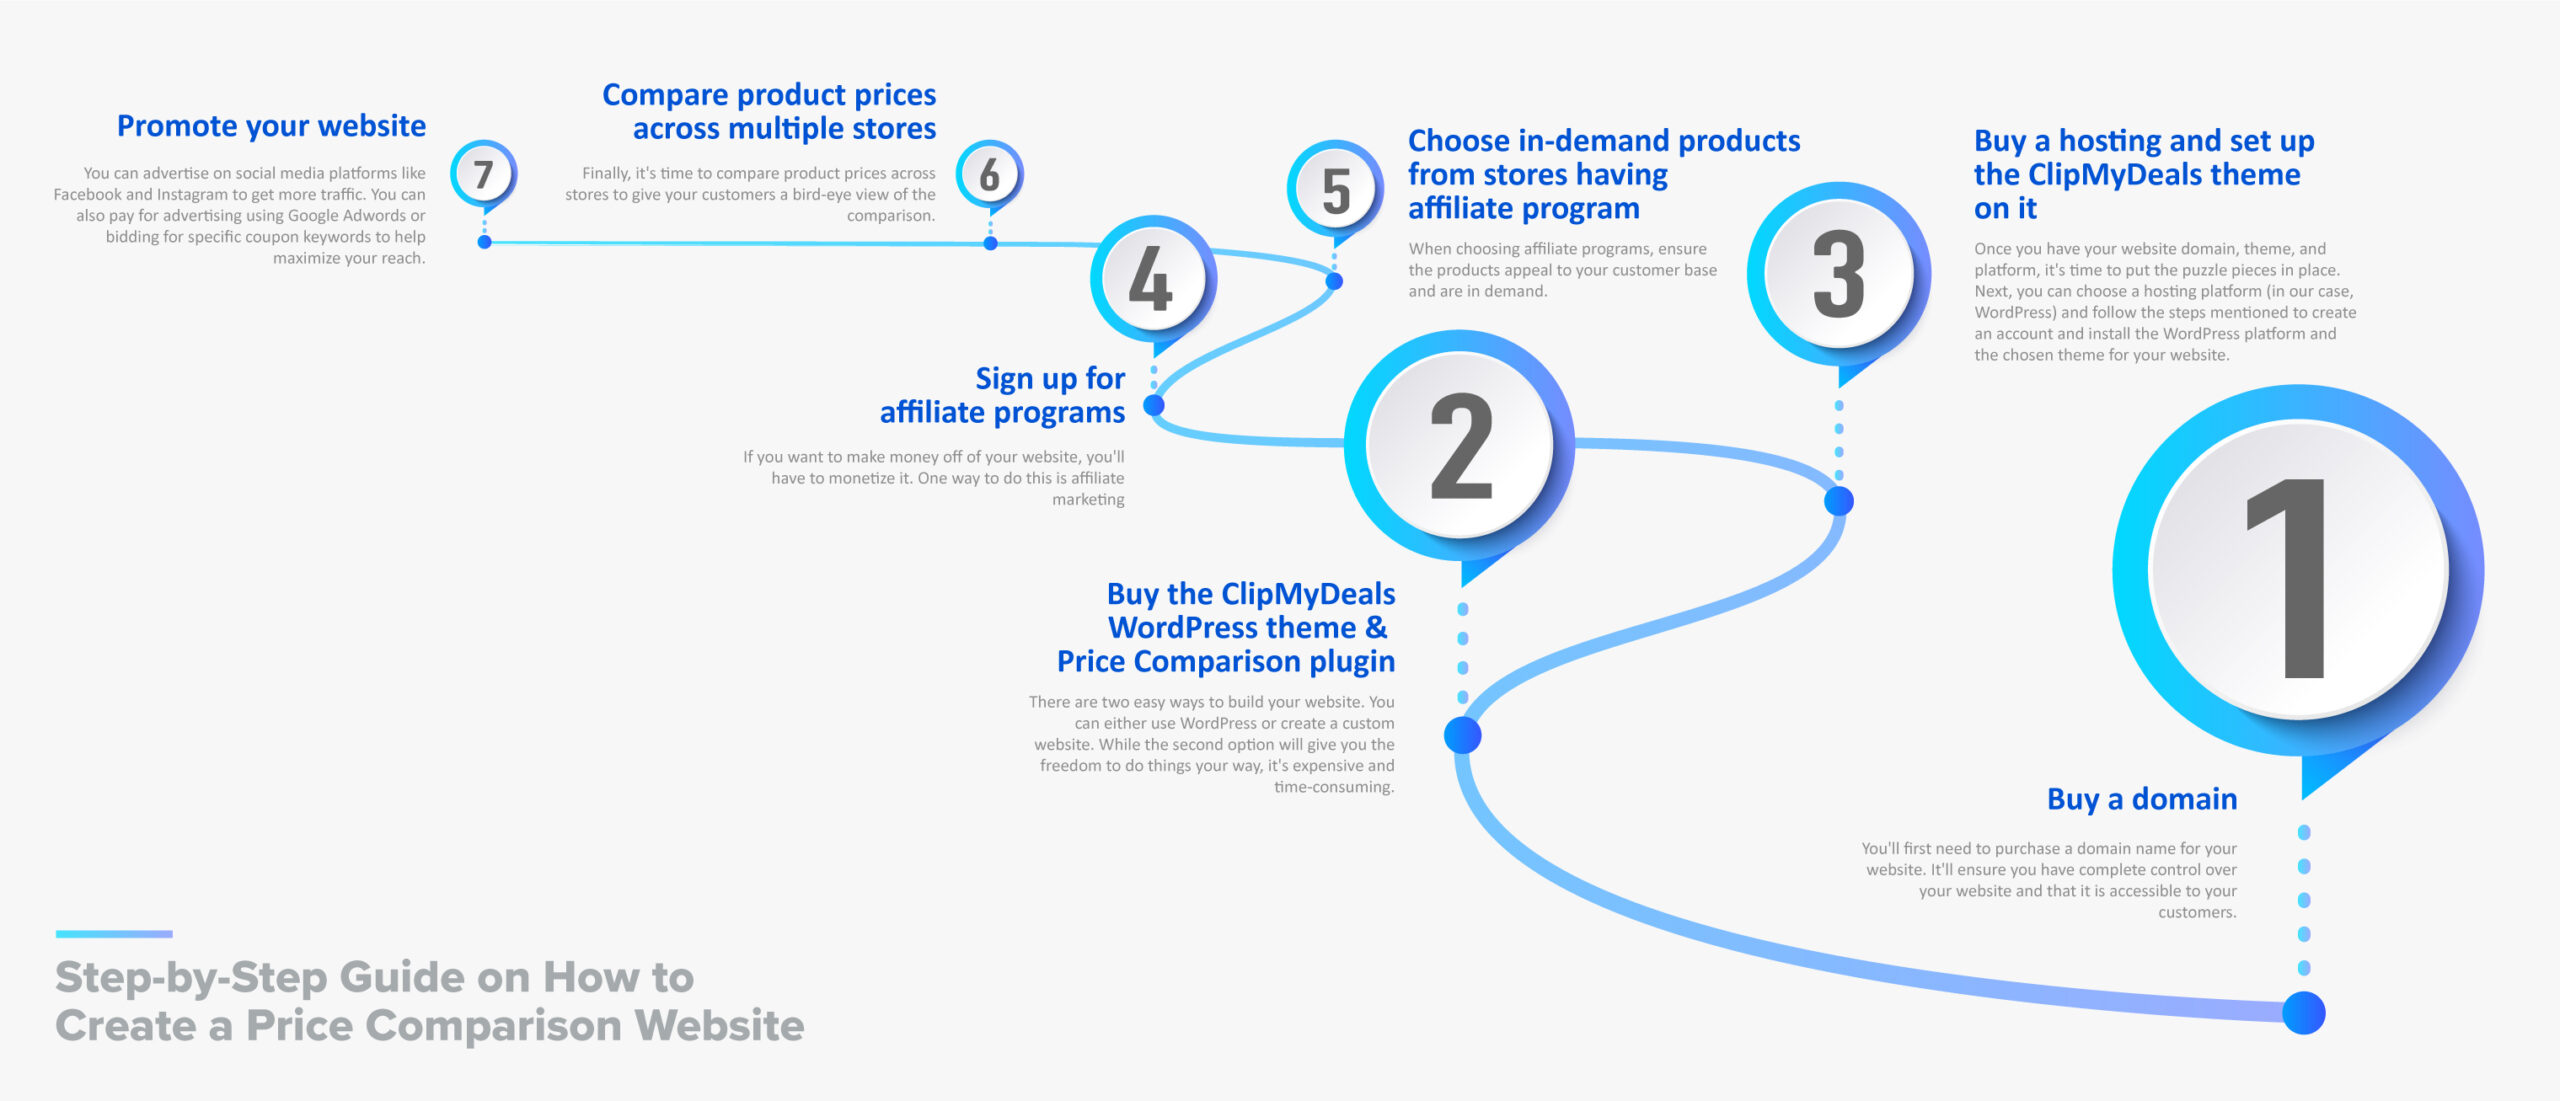 Step-by-step guide on how to create a price comparison website